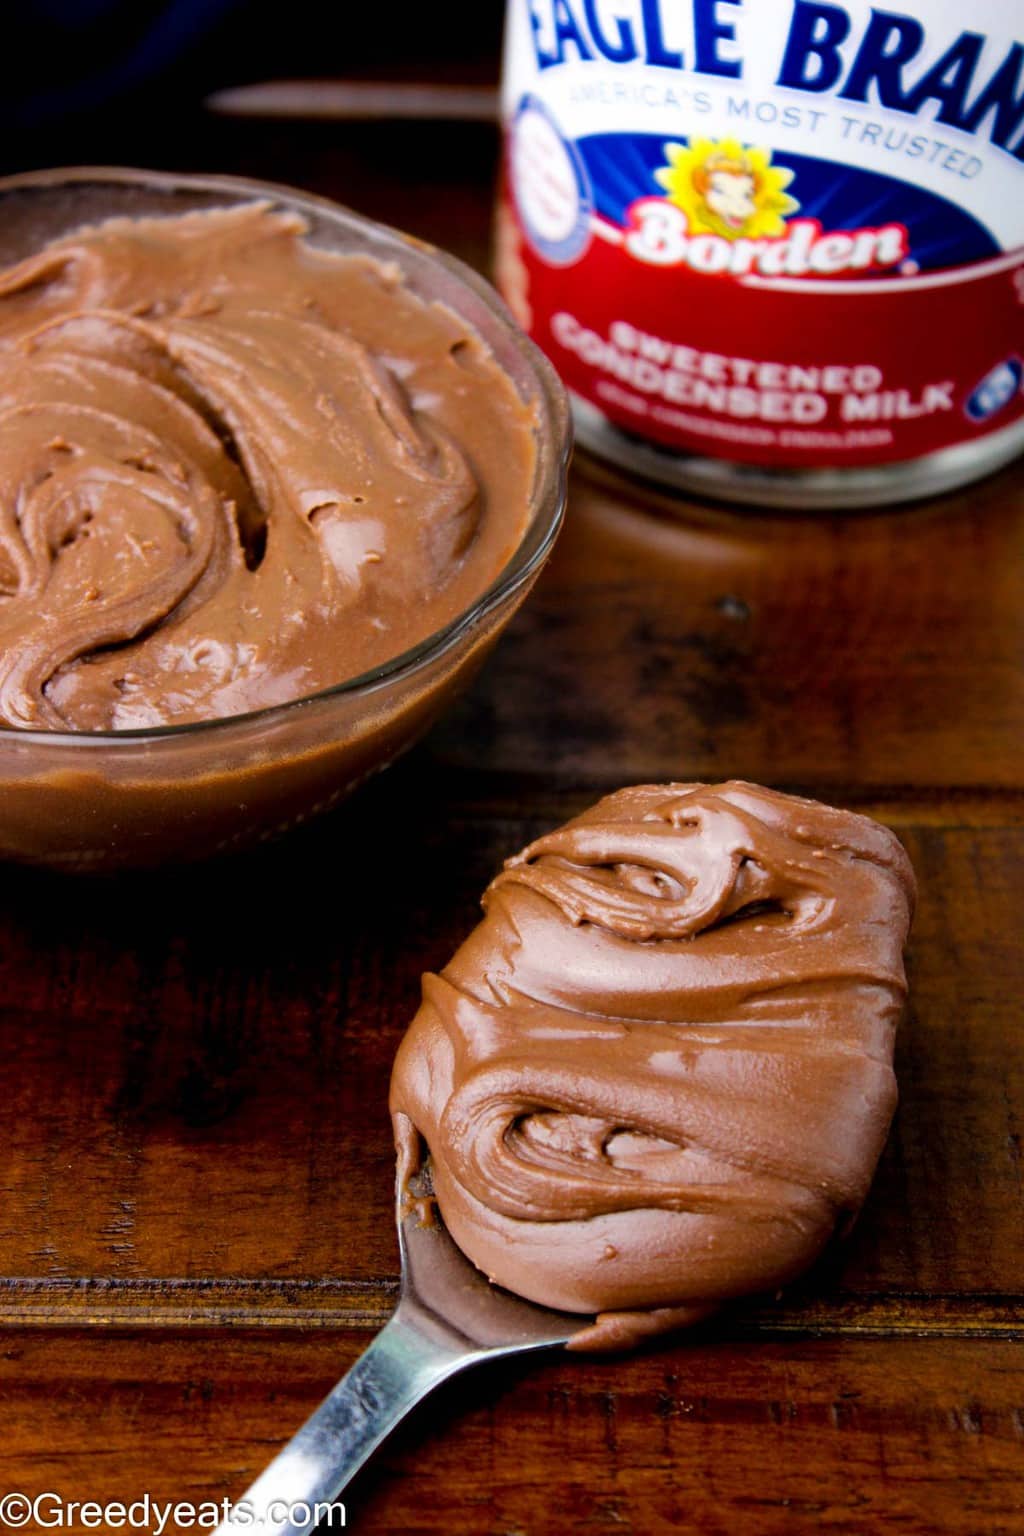 You'd want to eat this luxurious and easy chocolate frosting by the spoonful!